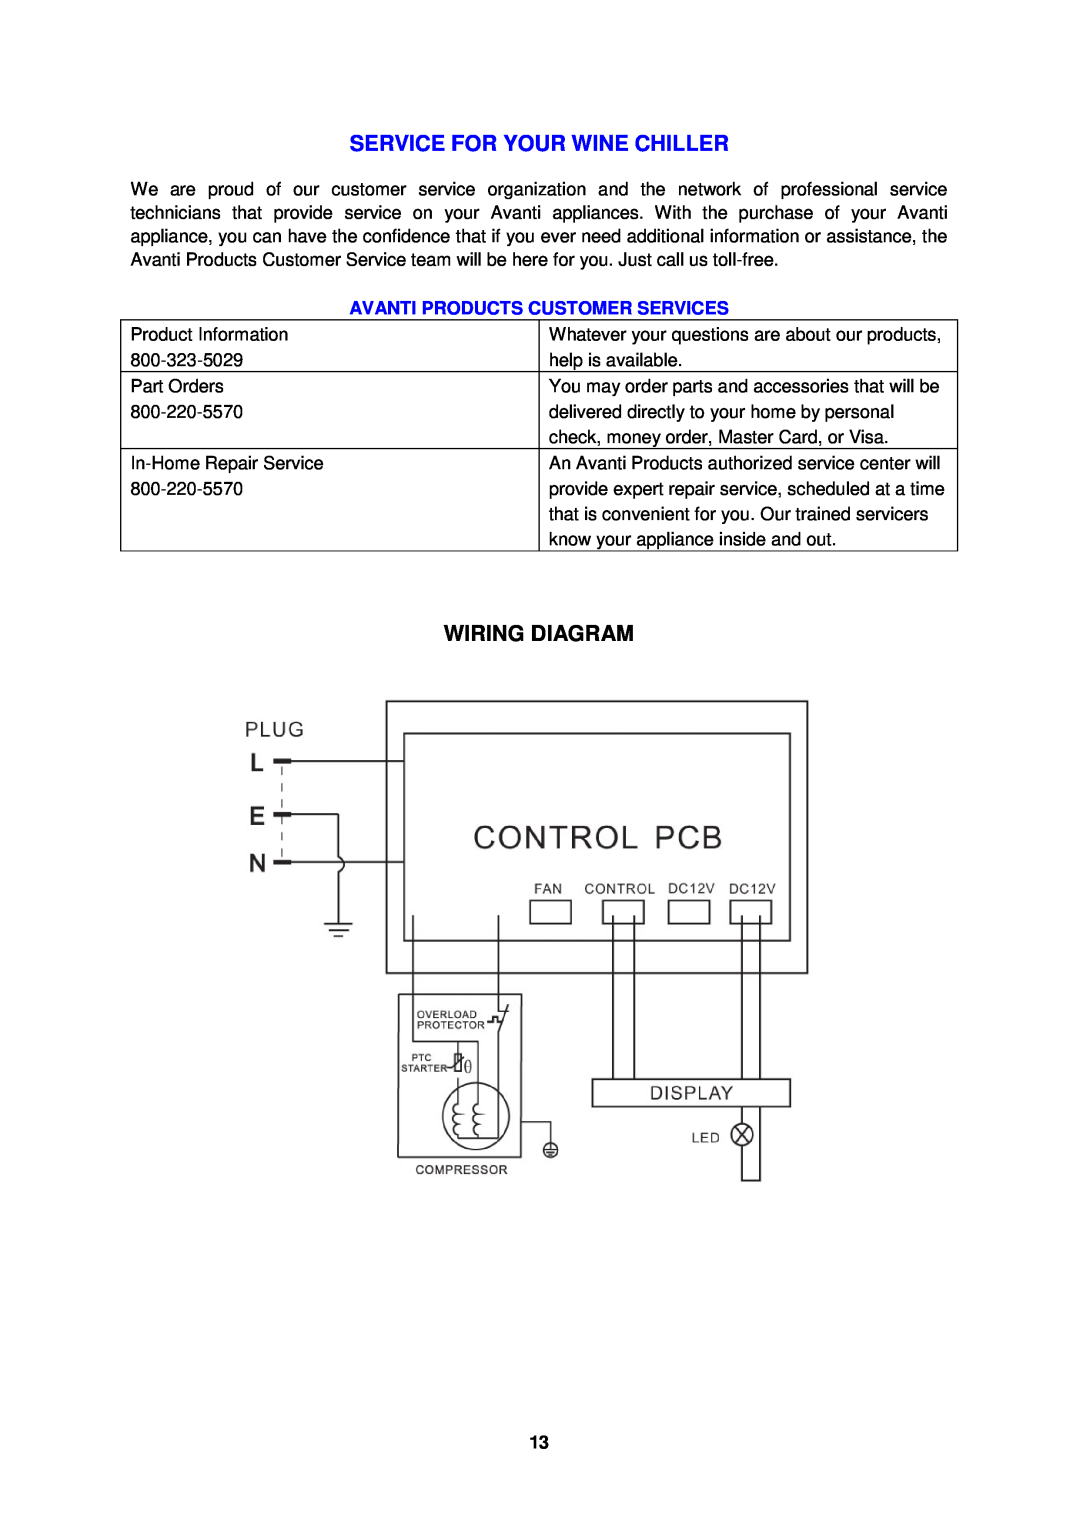 Avanti WC3406 instruction manual Service For Your Wine Chiller, Wiring Diagram, Avanti Products Customer Services 